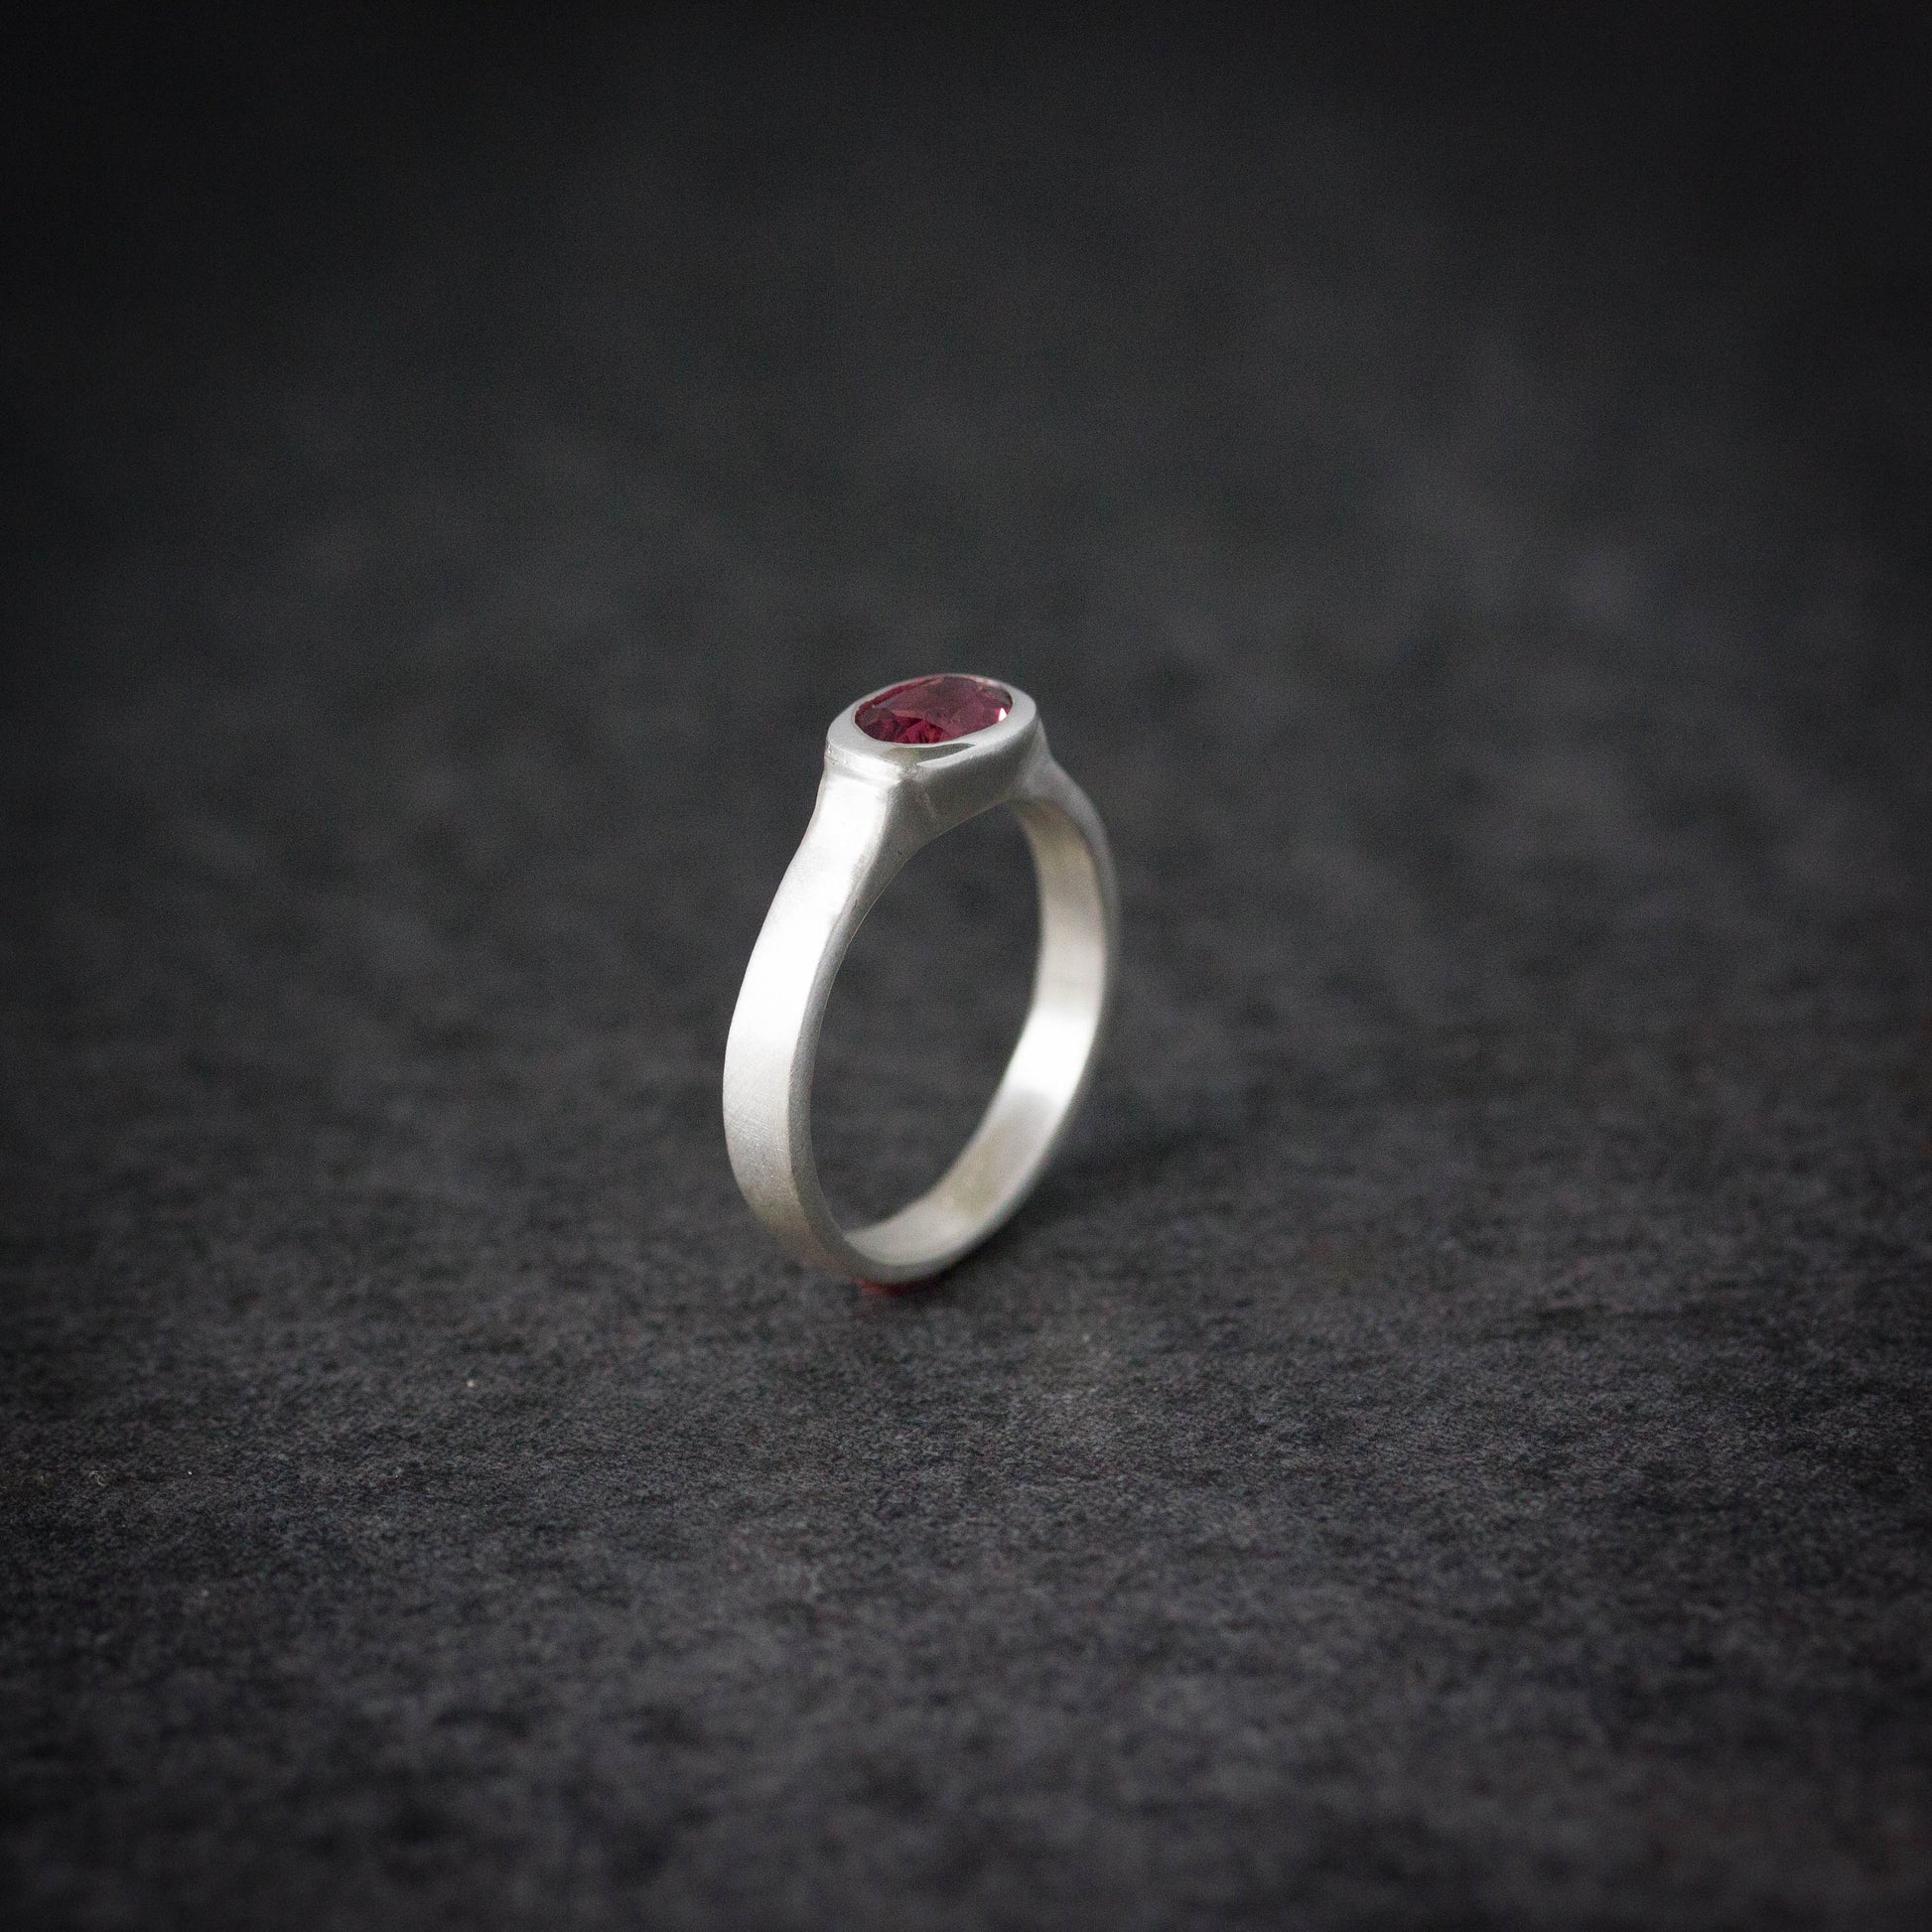 A handmade Pink Tourmaline Wide Band Ring, Brushed Silver With Low Profile, Size 7 Oval Gemstone Solitaire and October Birthstone.